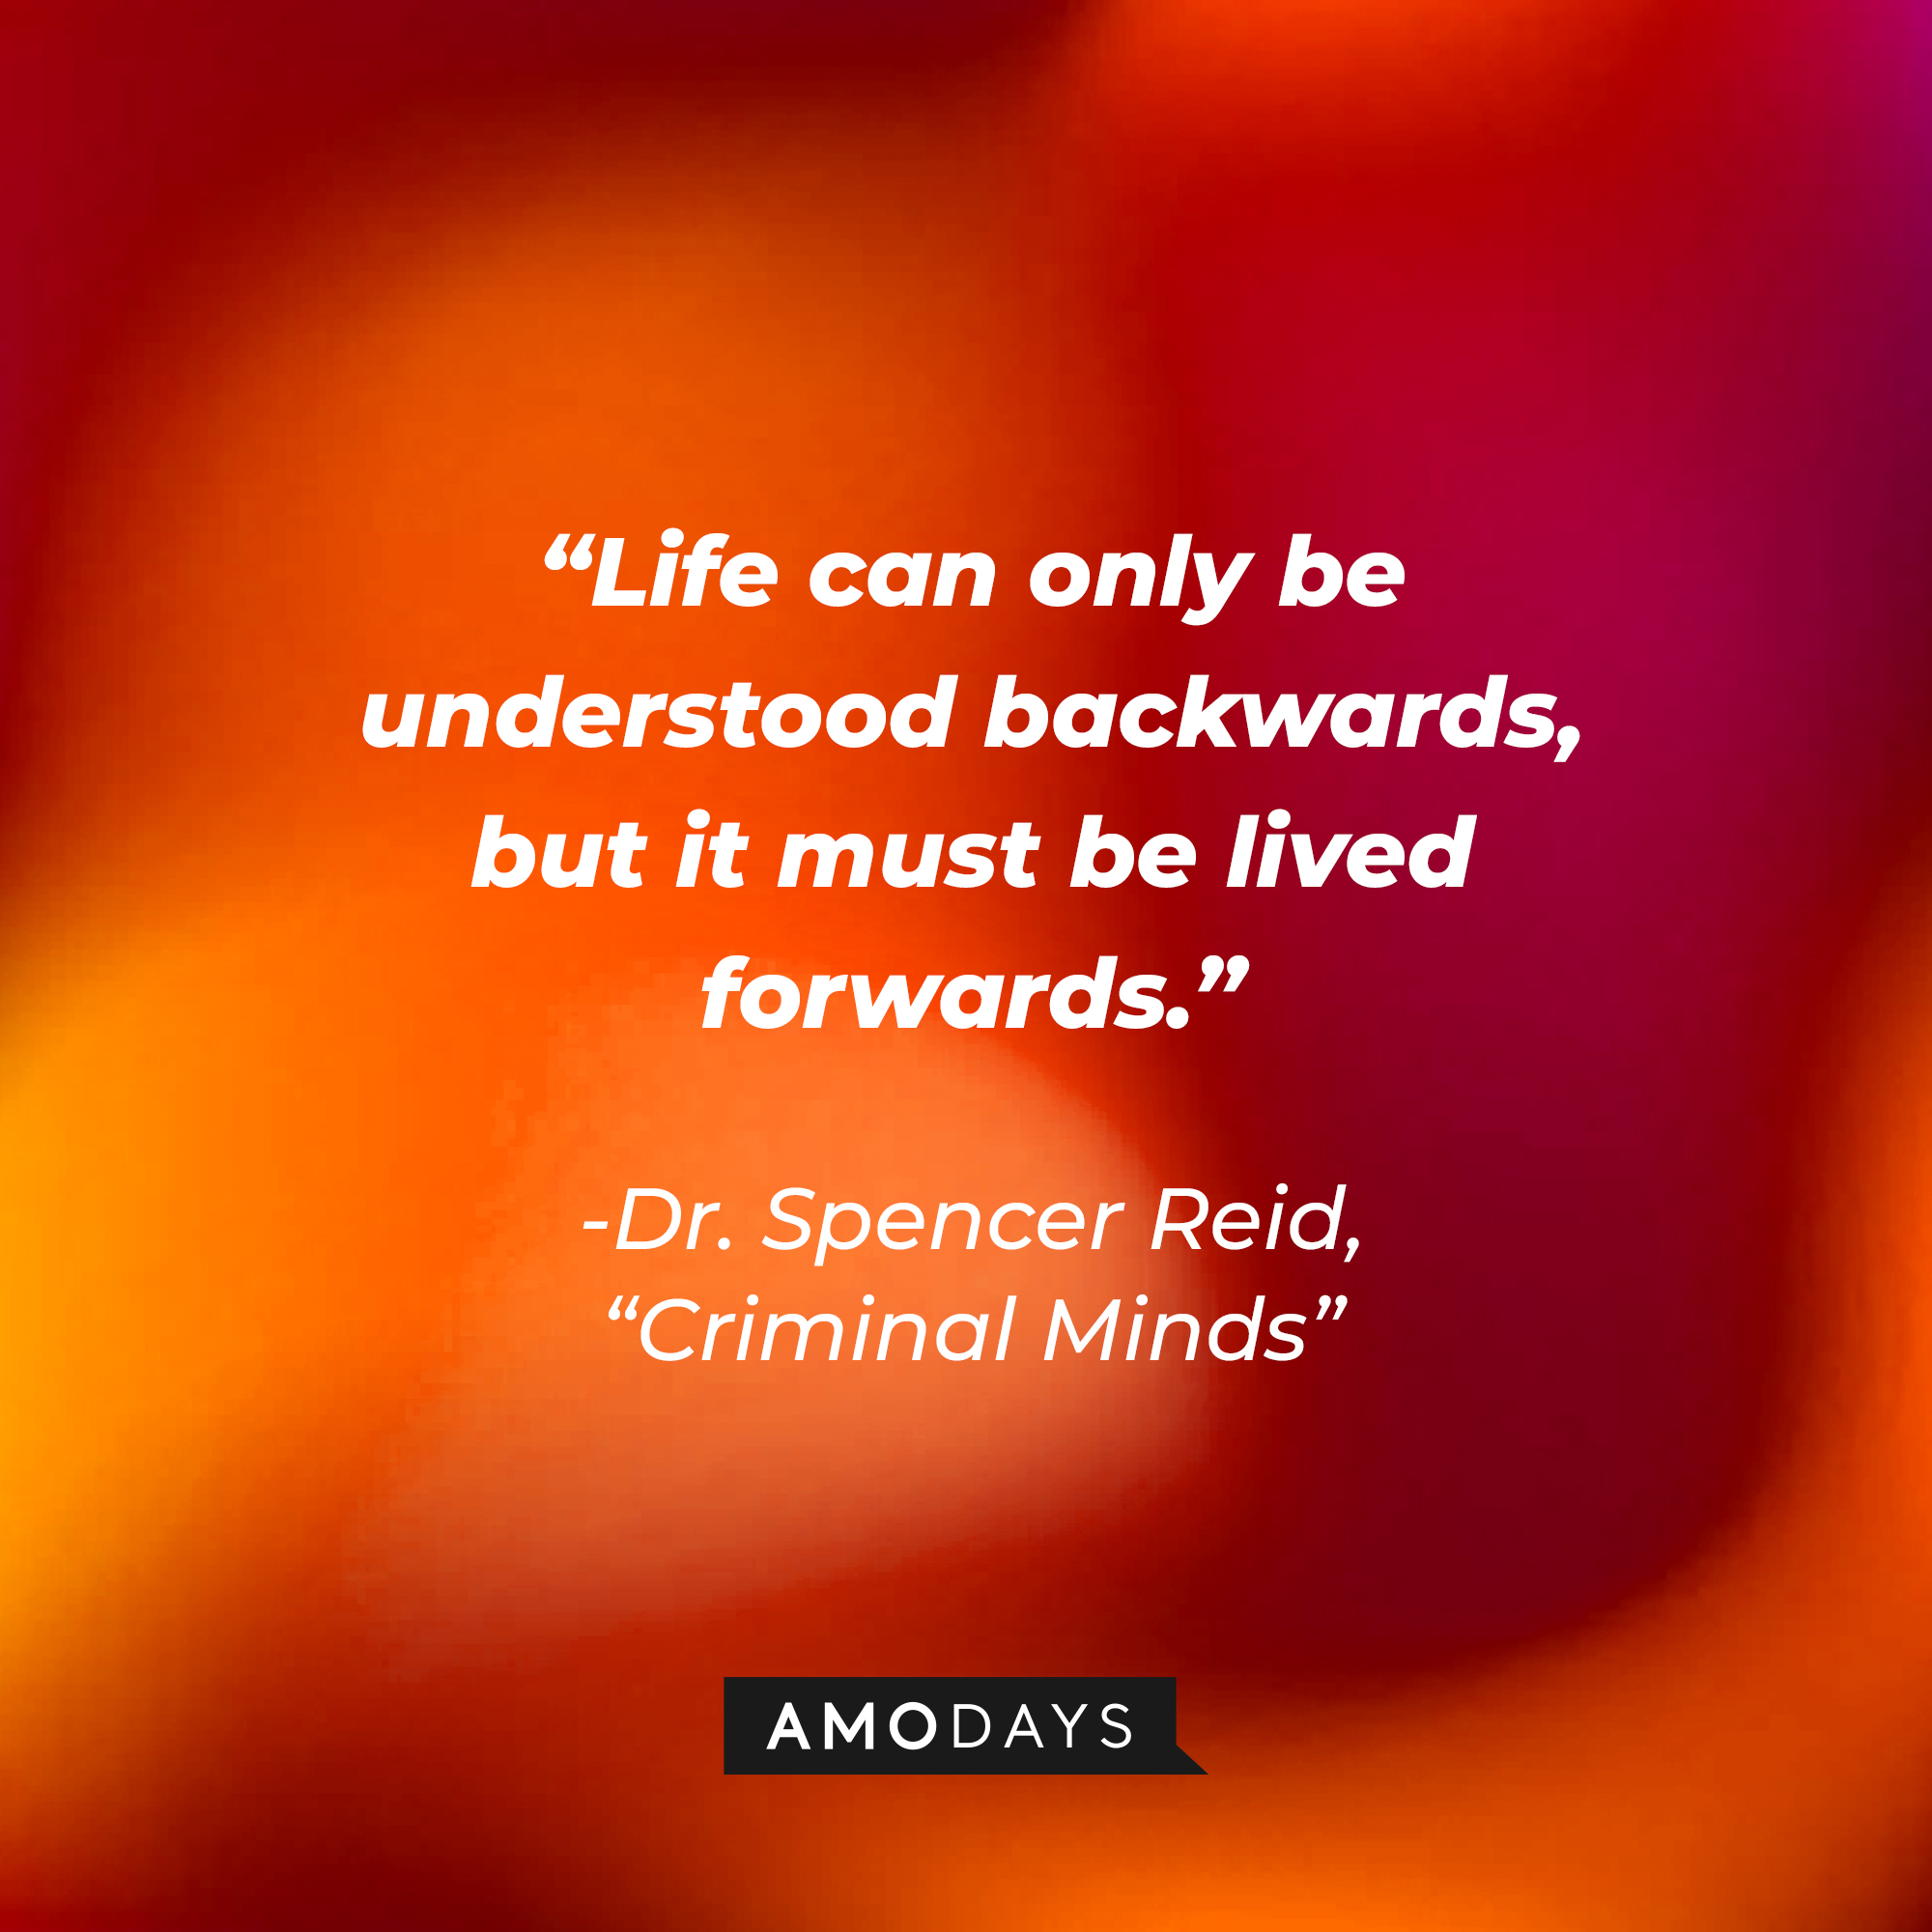 Dr. Spencer Reid's quote: “Life can only be understood backwards, but it must be lived forwards.” | Source: Amodays